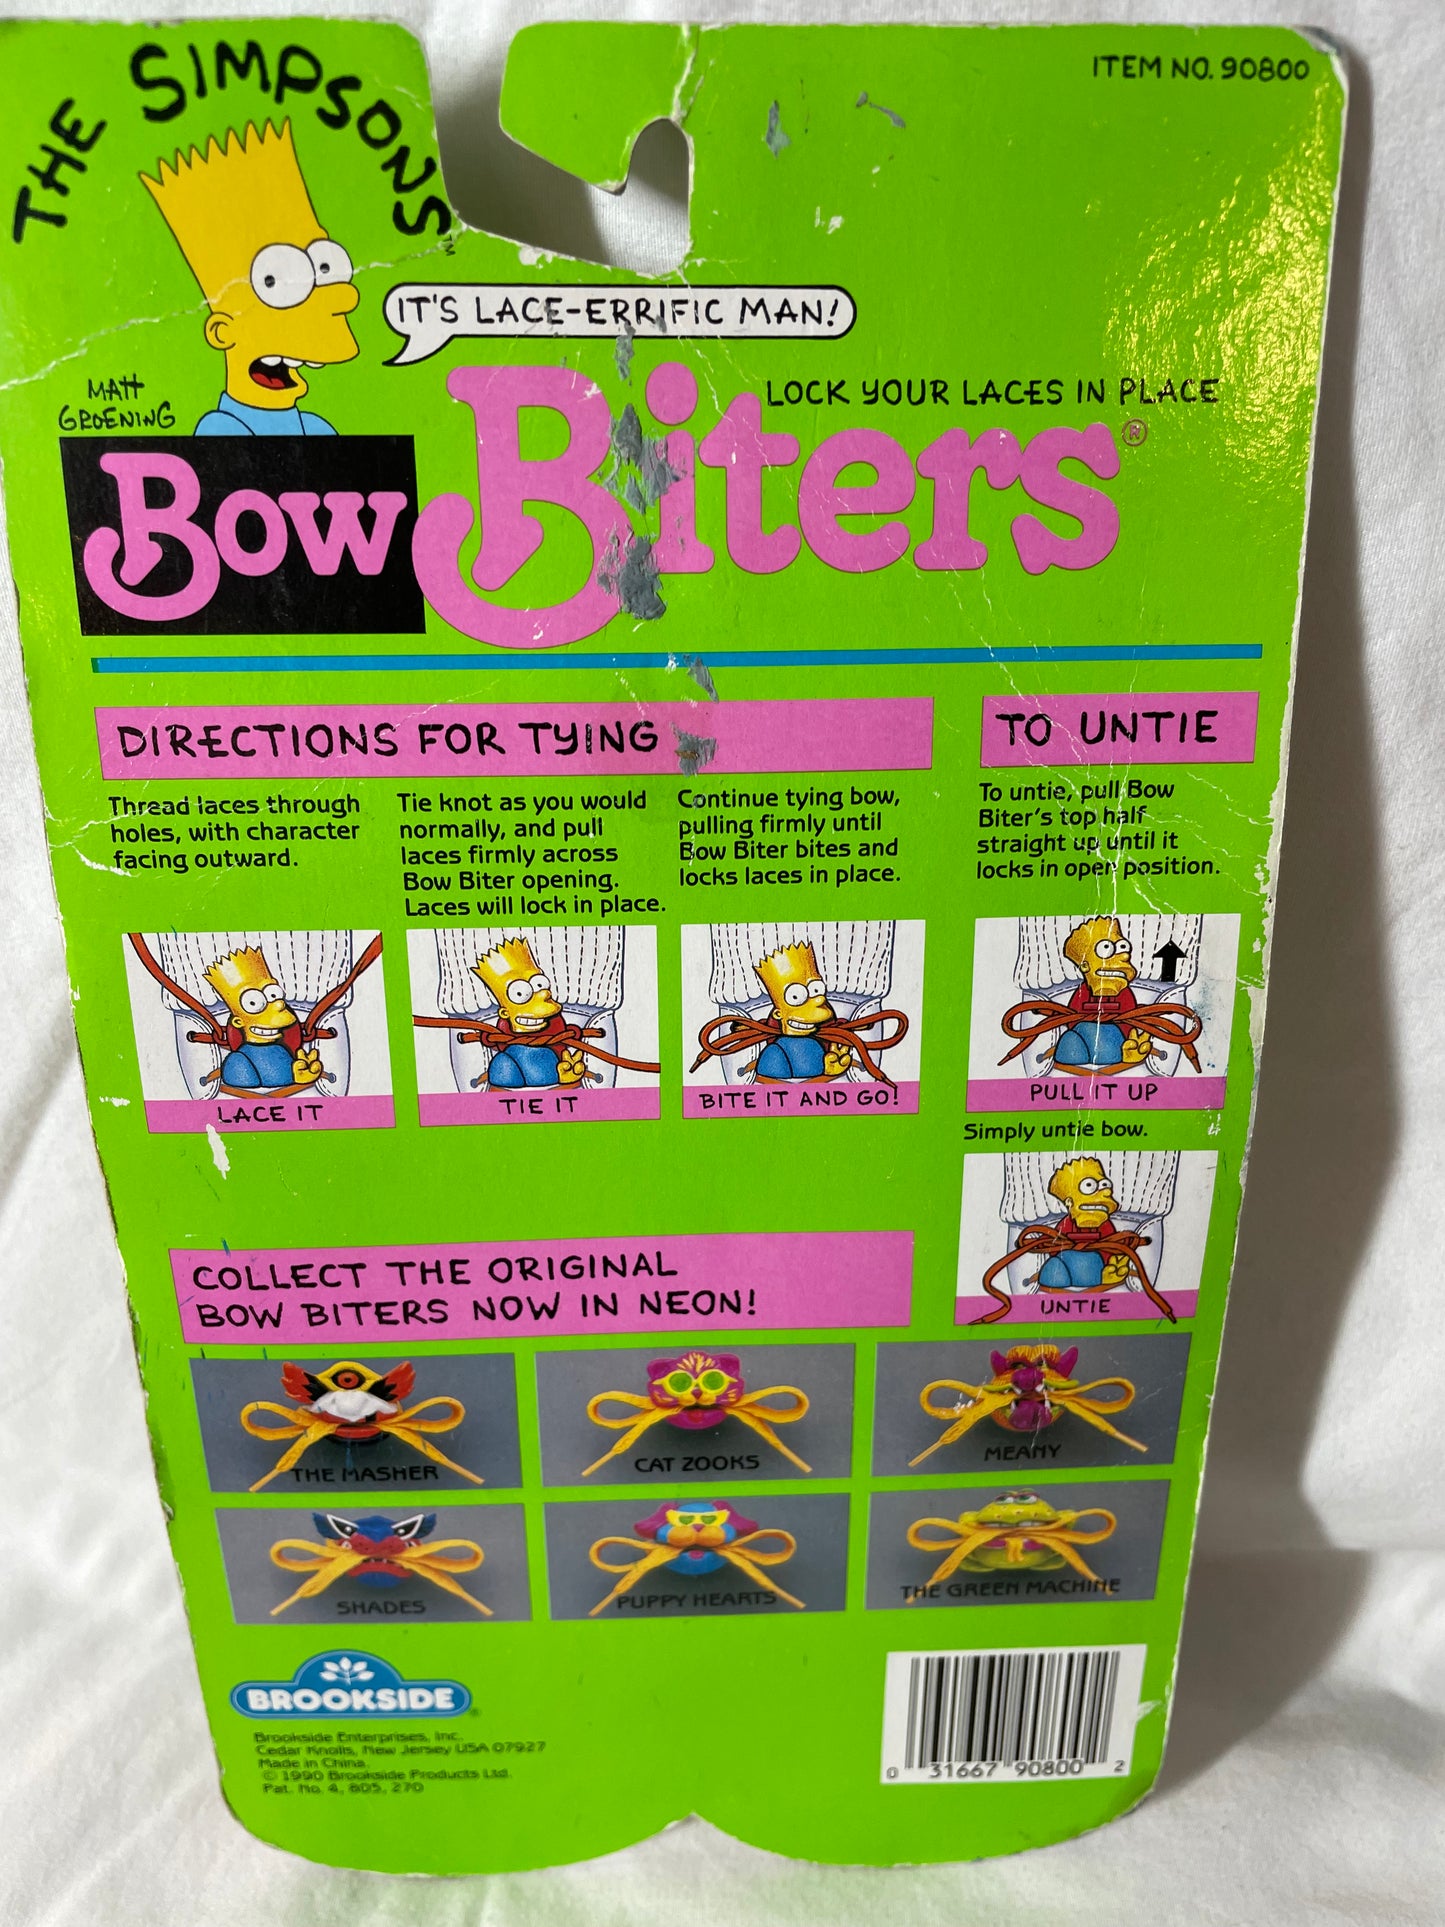 The Simpsons - Bow Biters 1990 #100048